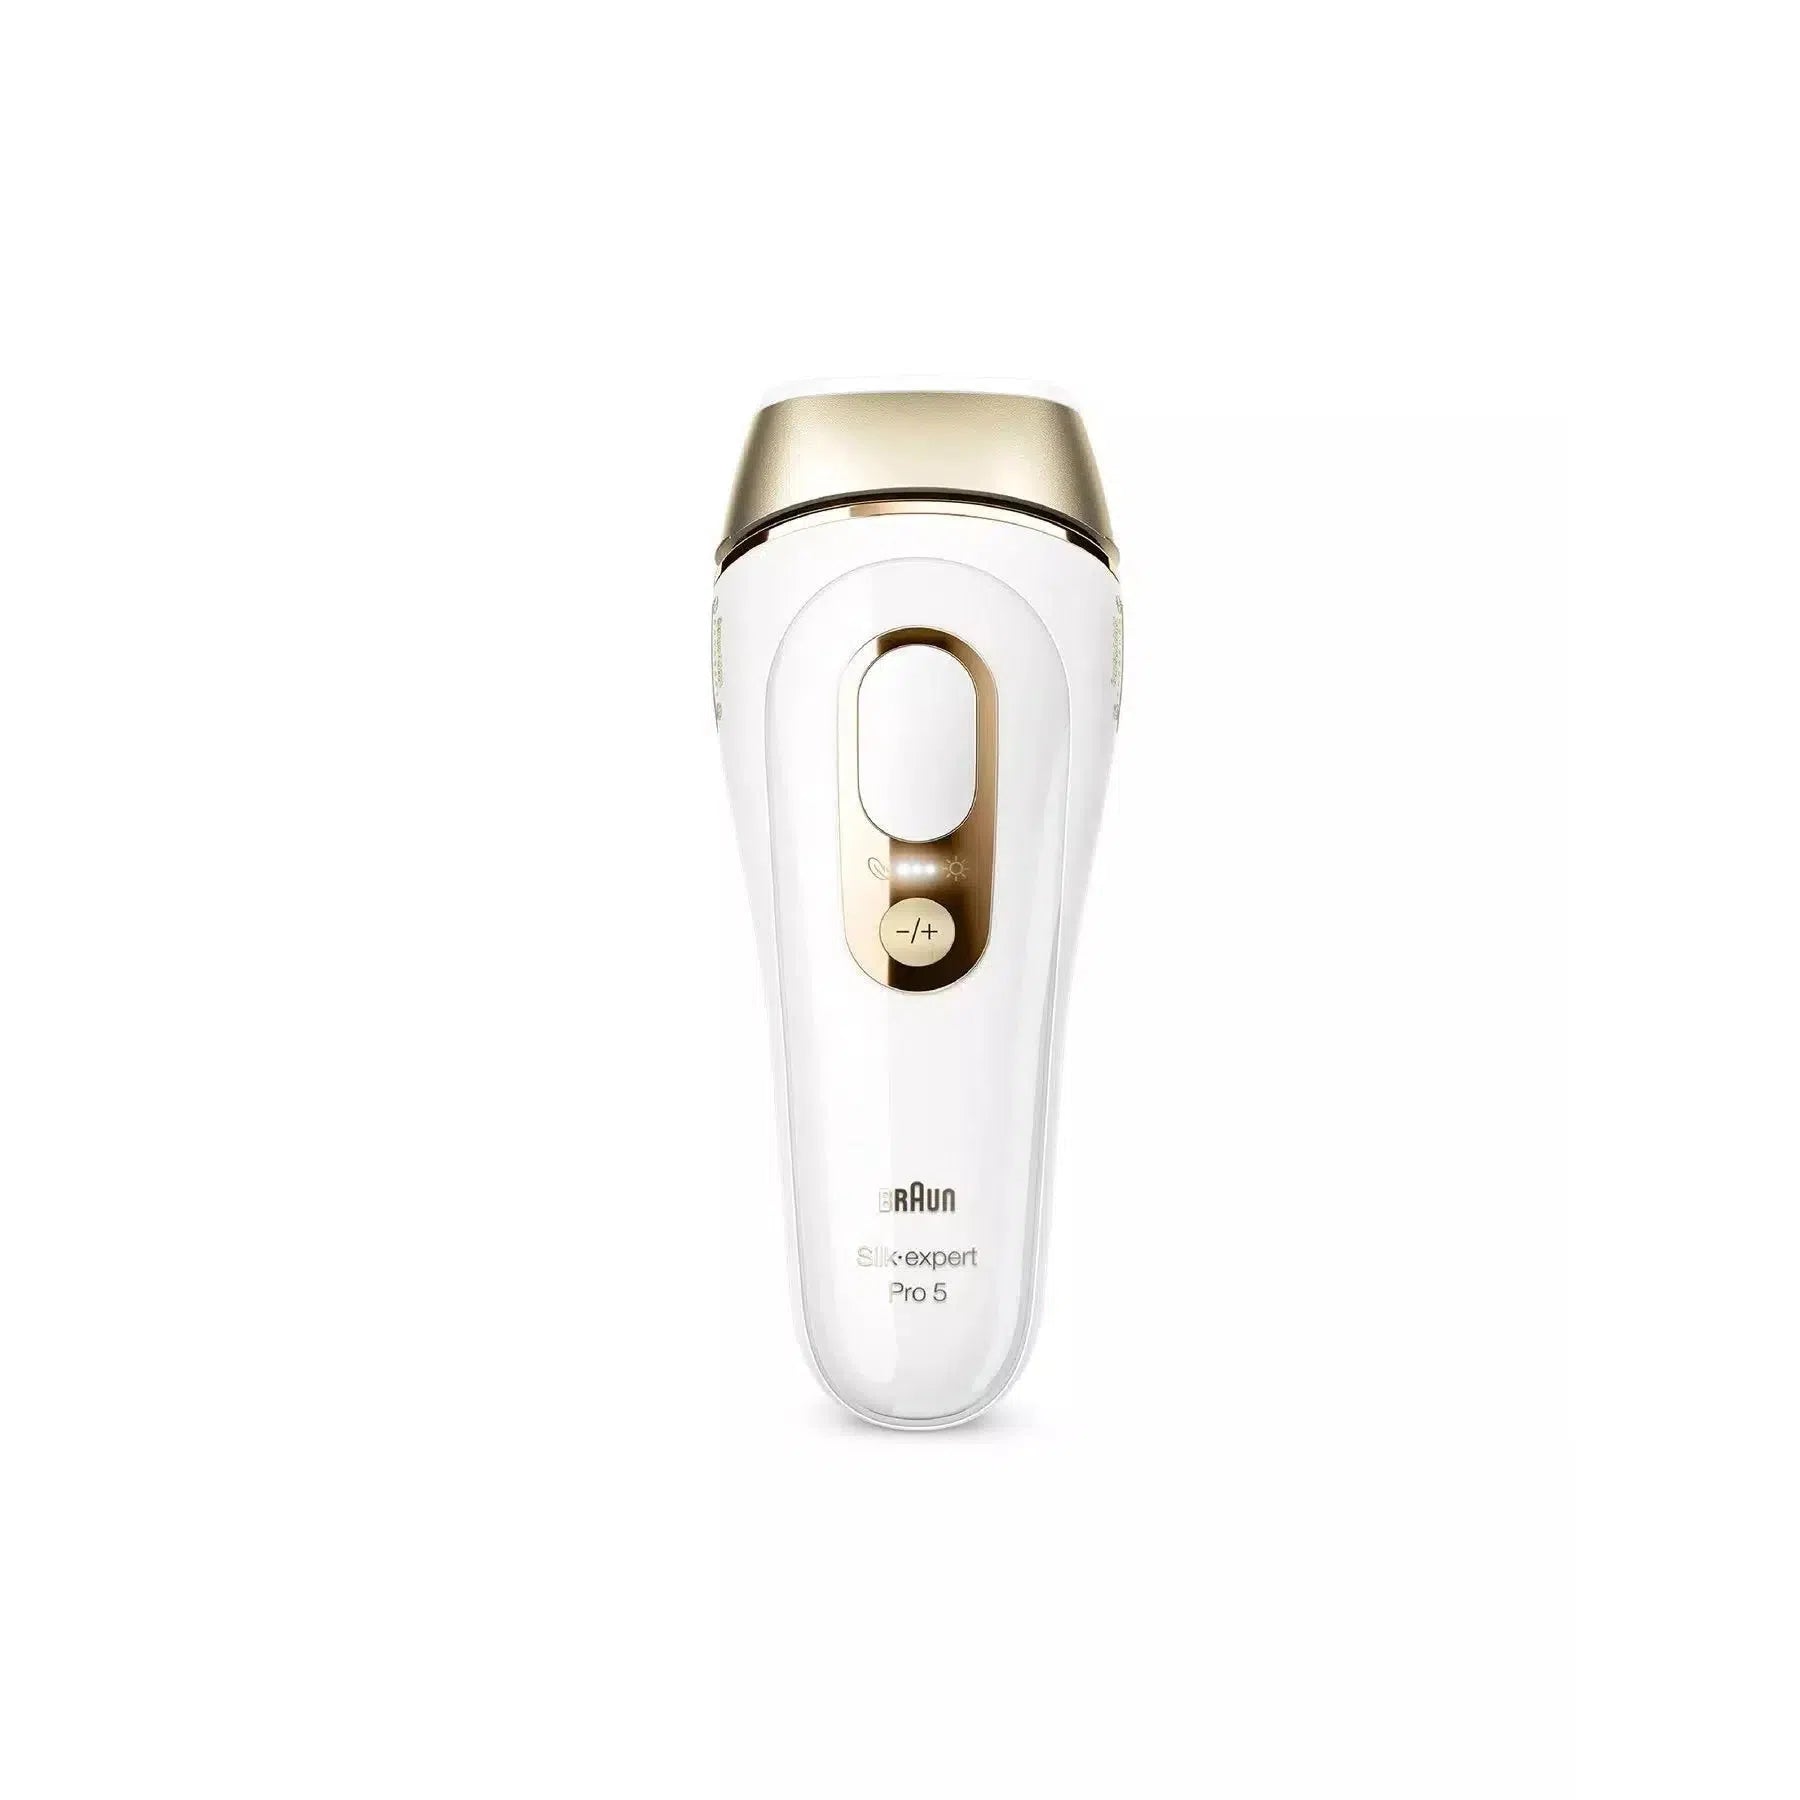 Braun Silk-expert Pro 5 PL5257 IPL Hair Removal System with precision cap & wider cap - Healthxpress.ie